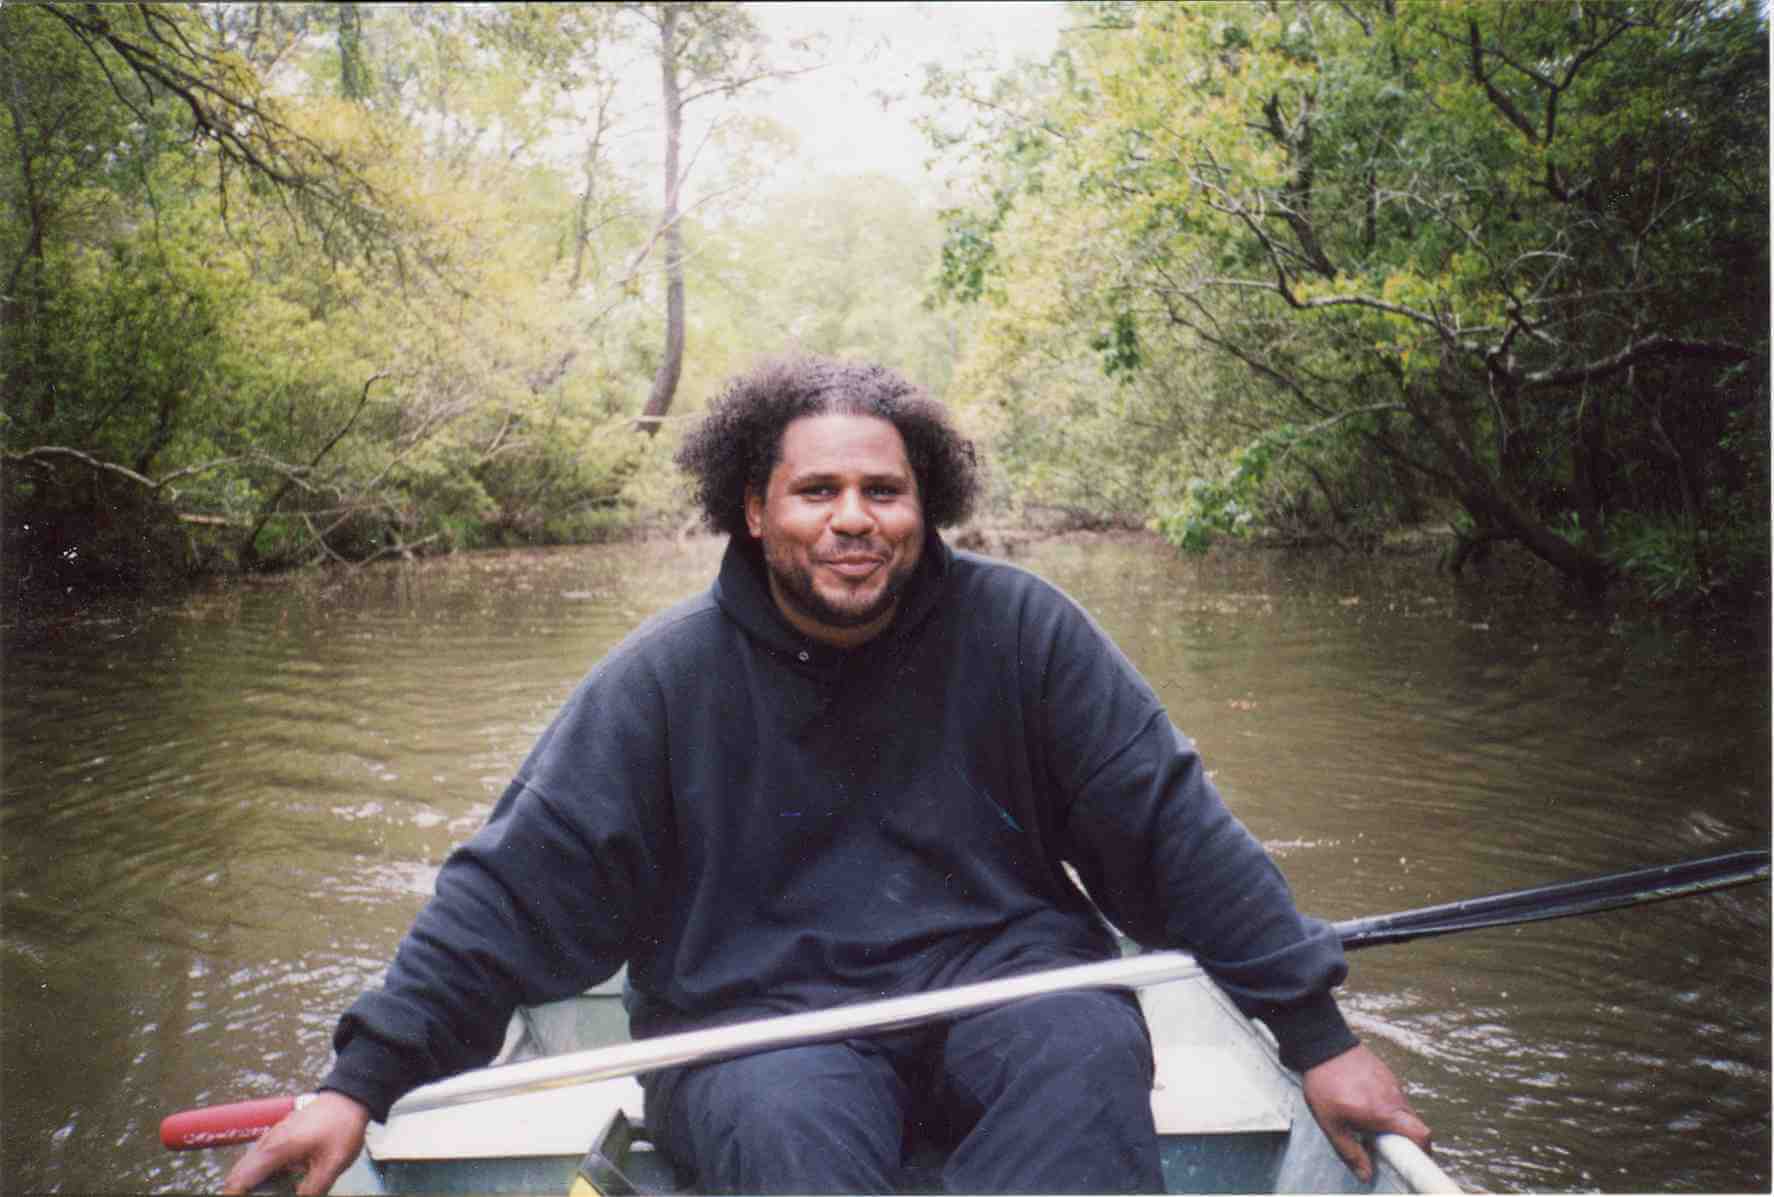 A man wearing a black hoodie and pants is rowing in a boat.